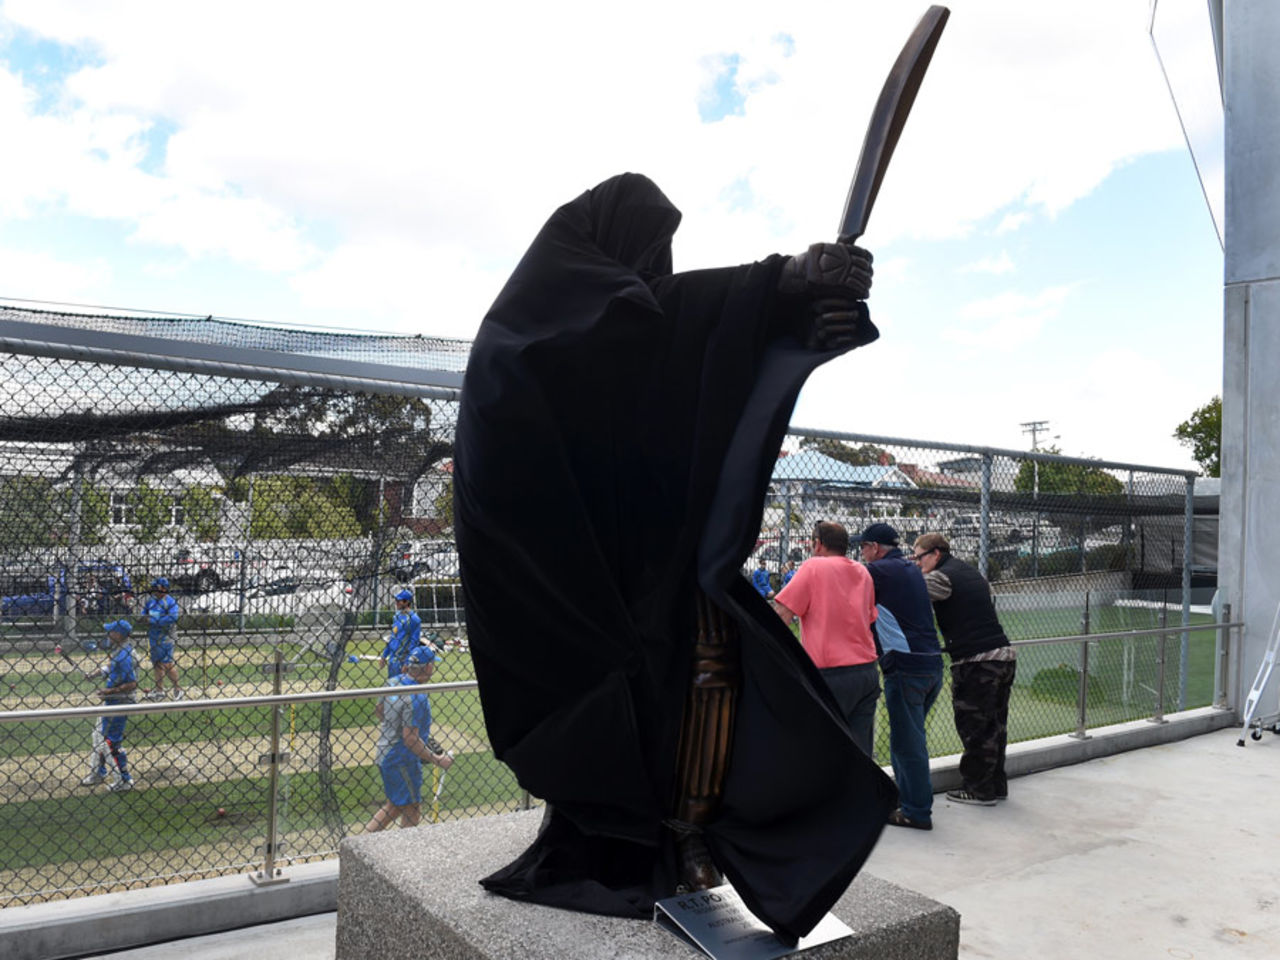 The Ricky Ponting statue before it was unveiled at the Bellerive Oval, Hobart, December 9, 2015